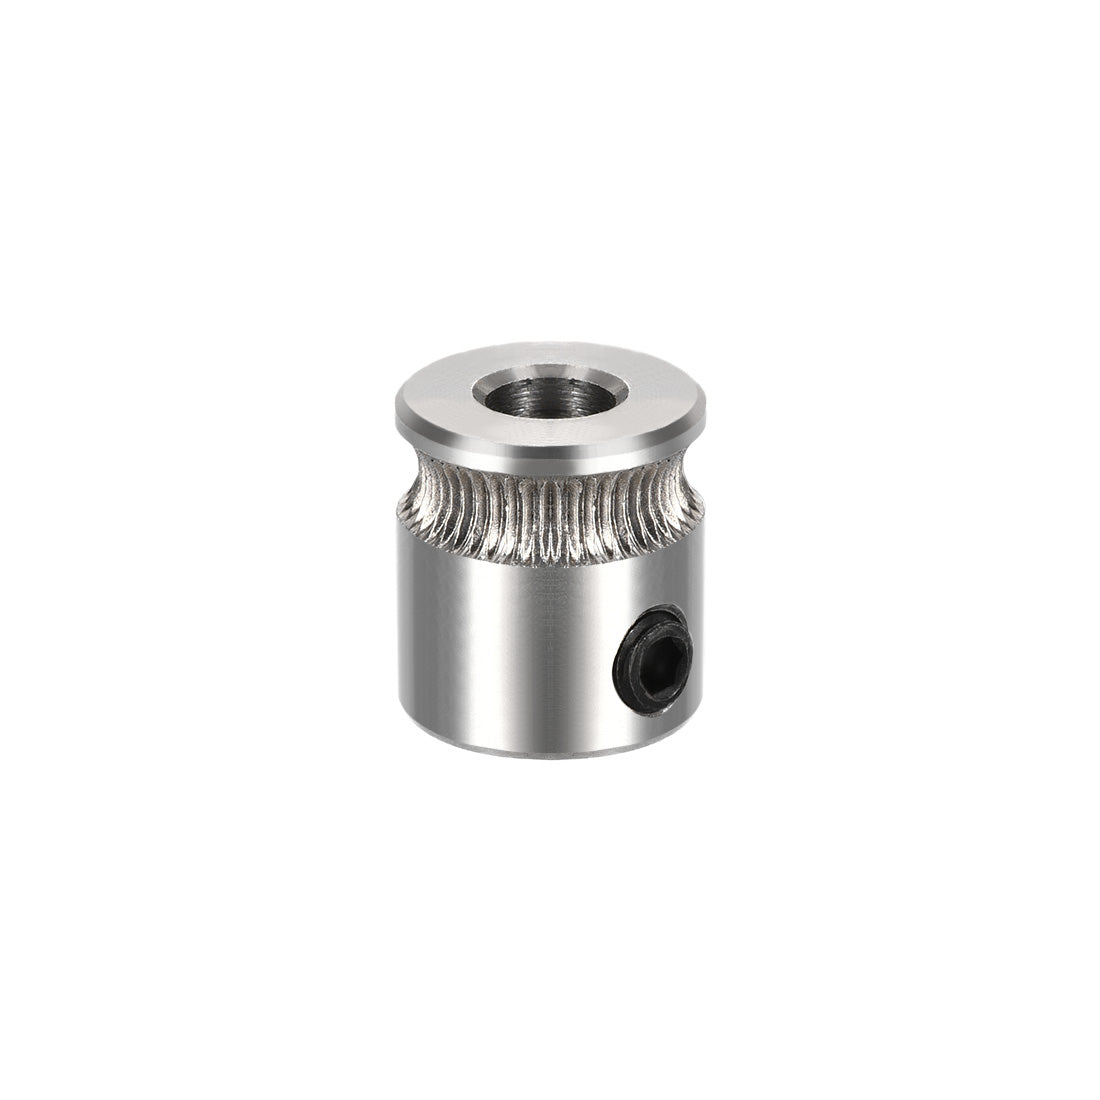 uxcell Uxcell MK7 Drive Gear Direct Extruder Drive 5mm Bore for Extruder